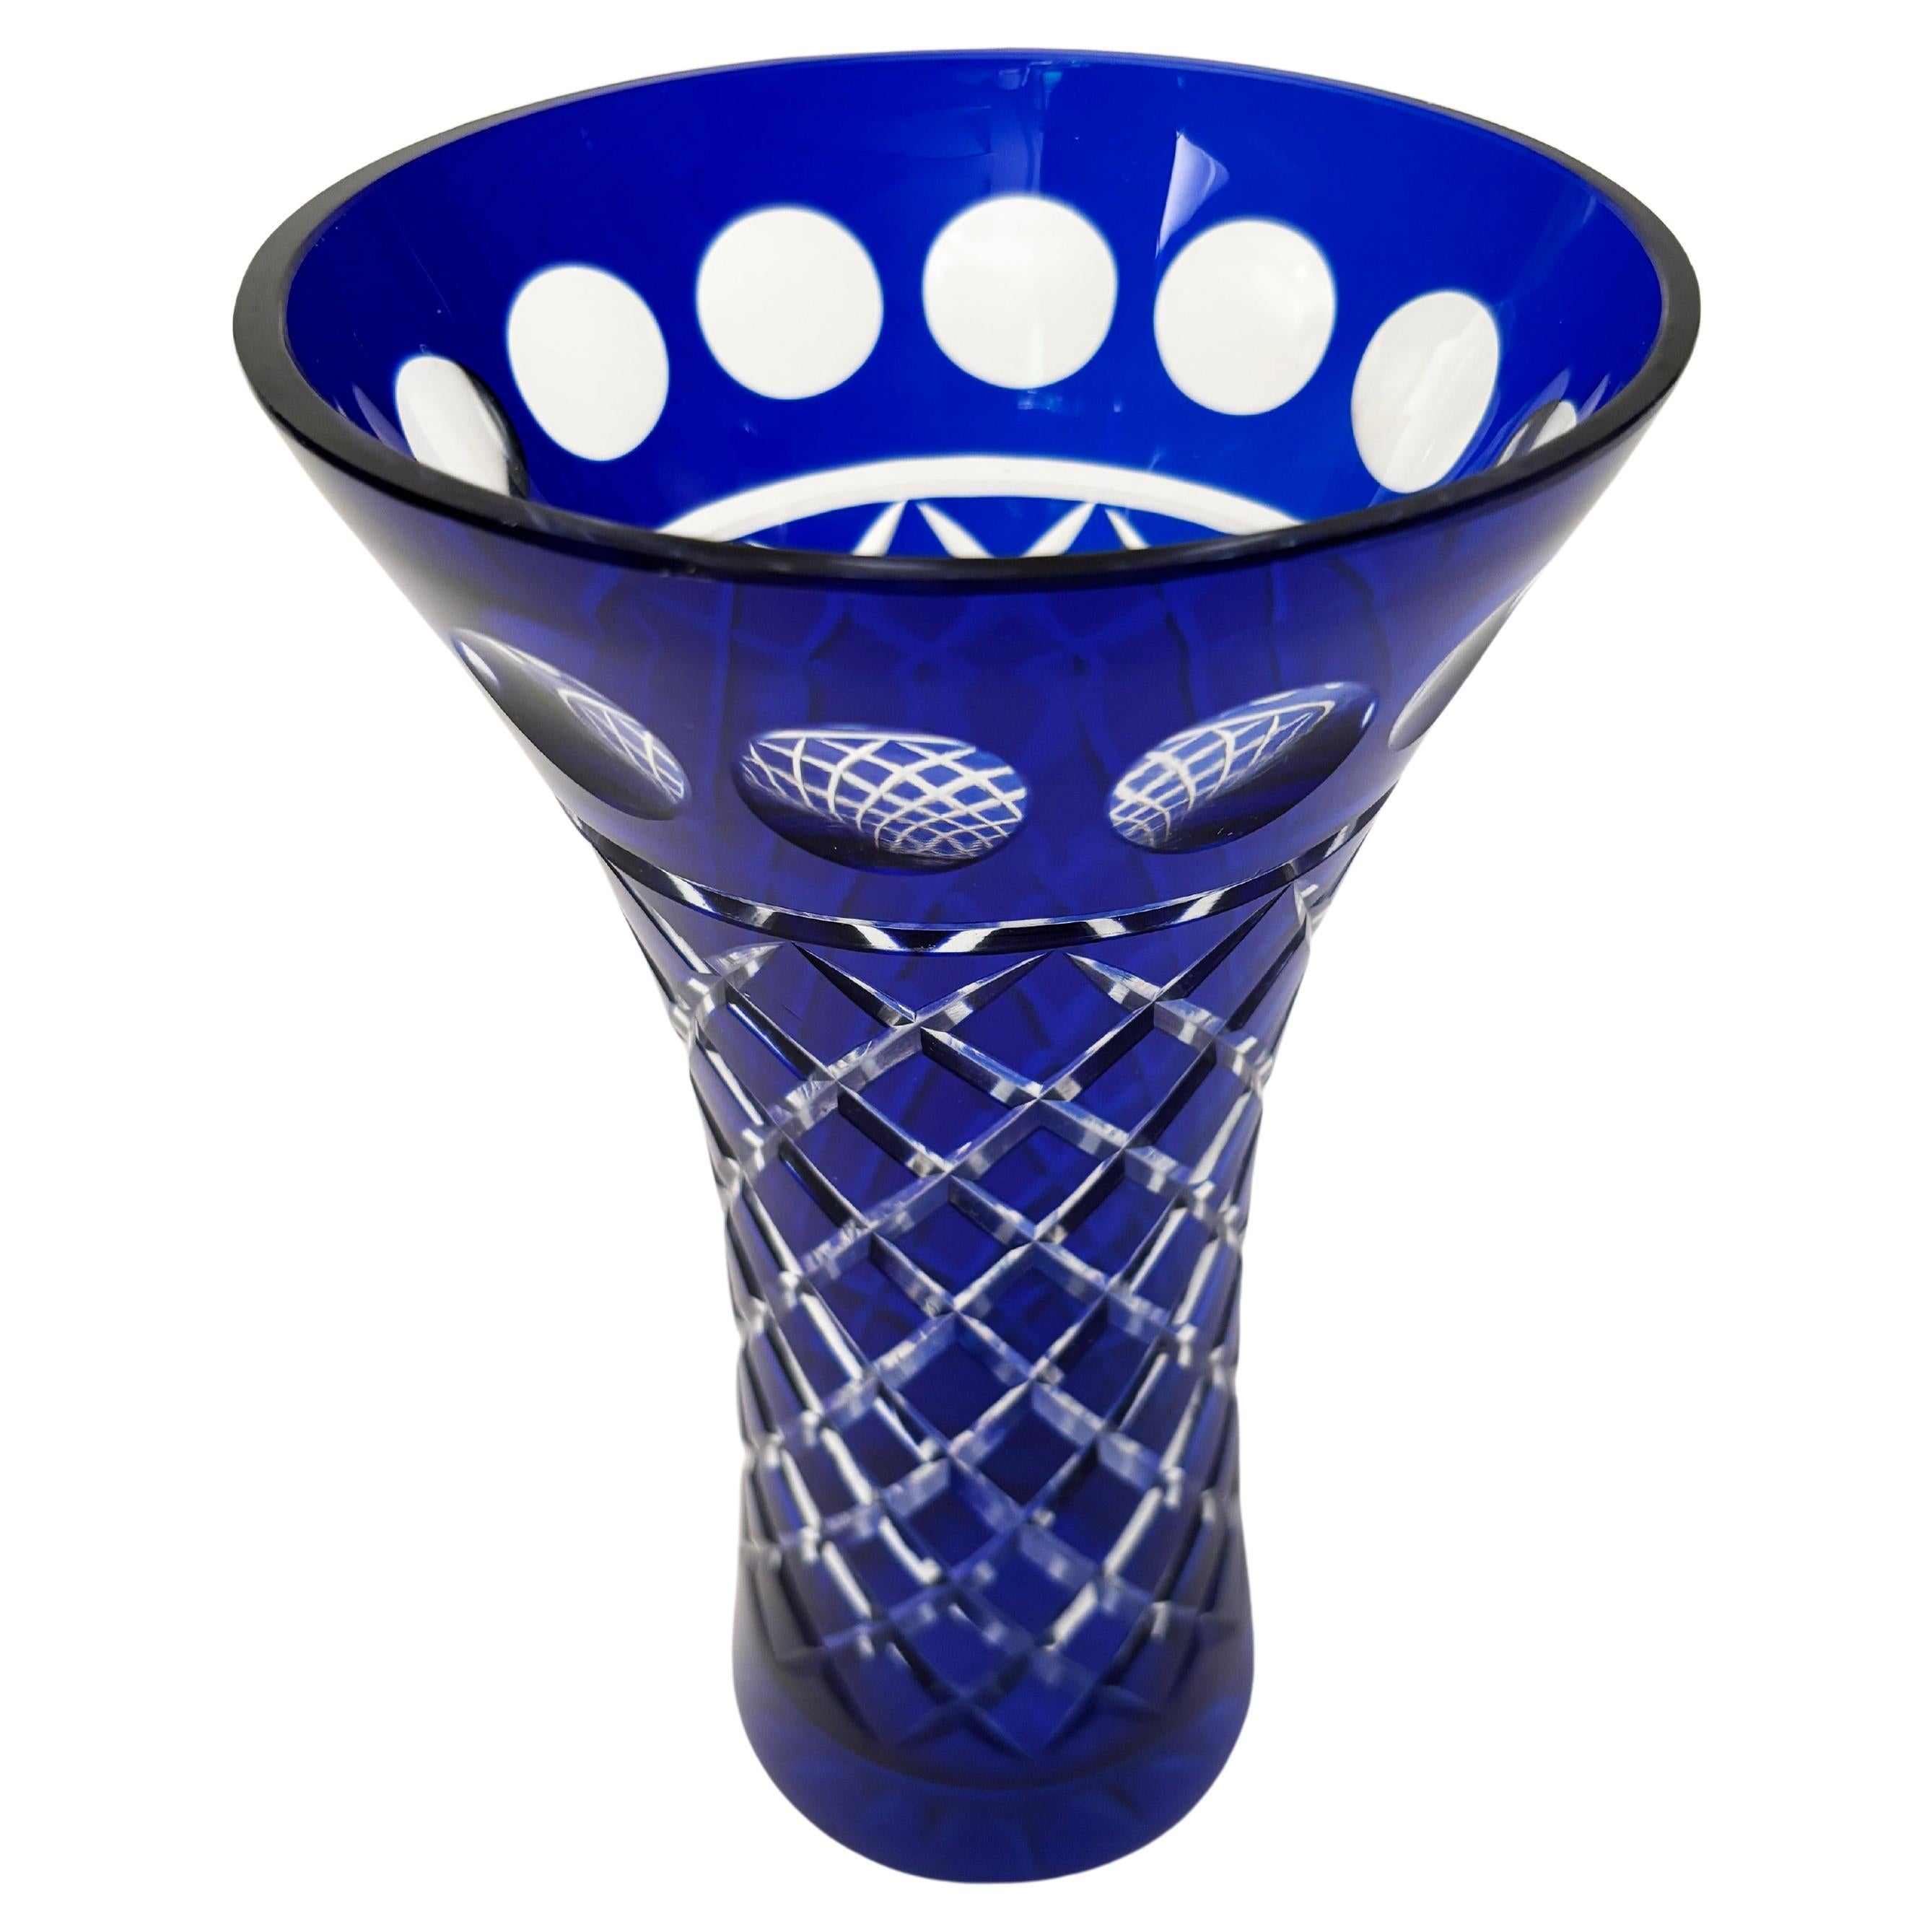 This stunning cobalt blue crystal Moser Bohemian vase is created using a cobalt blue cut to clear glass method that creates spectacular effects. The circular patterns, coupled with the diamond cut body, all on a beautifully curved vase makes this a